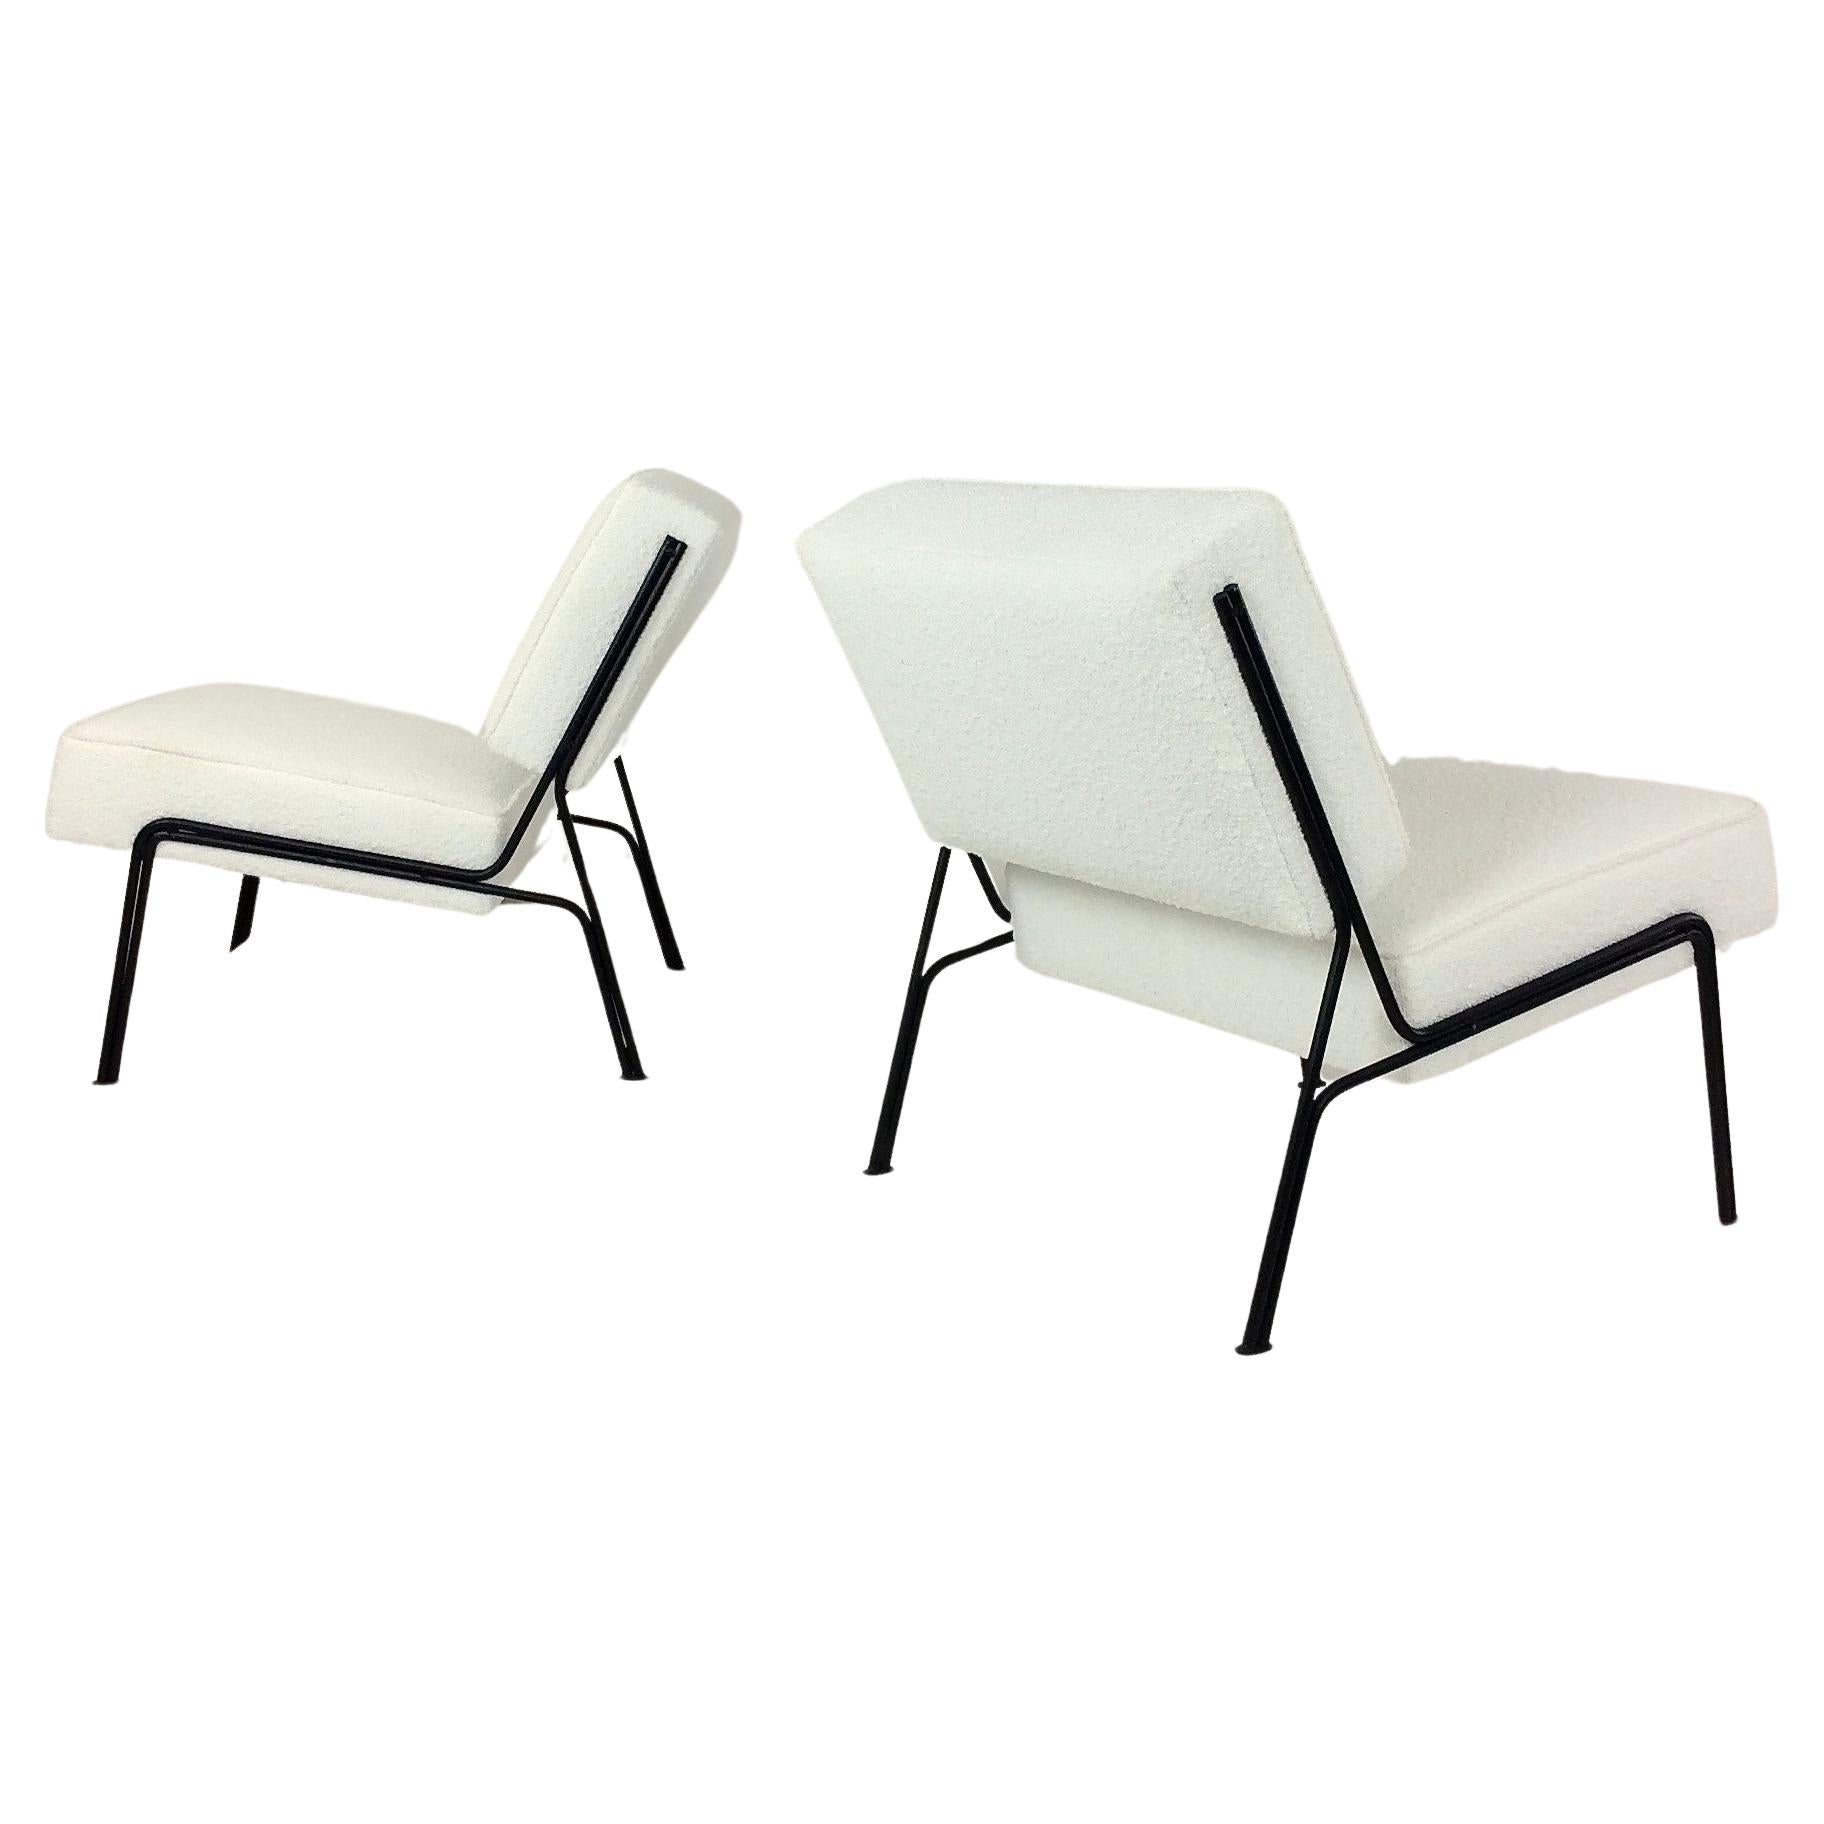 Pair of G2 Chairs By A.R.P. Guariche, Motte, Mortier for Airborne, 1953, France. For Sale